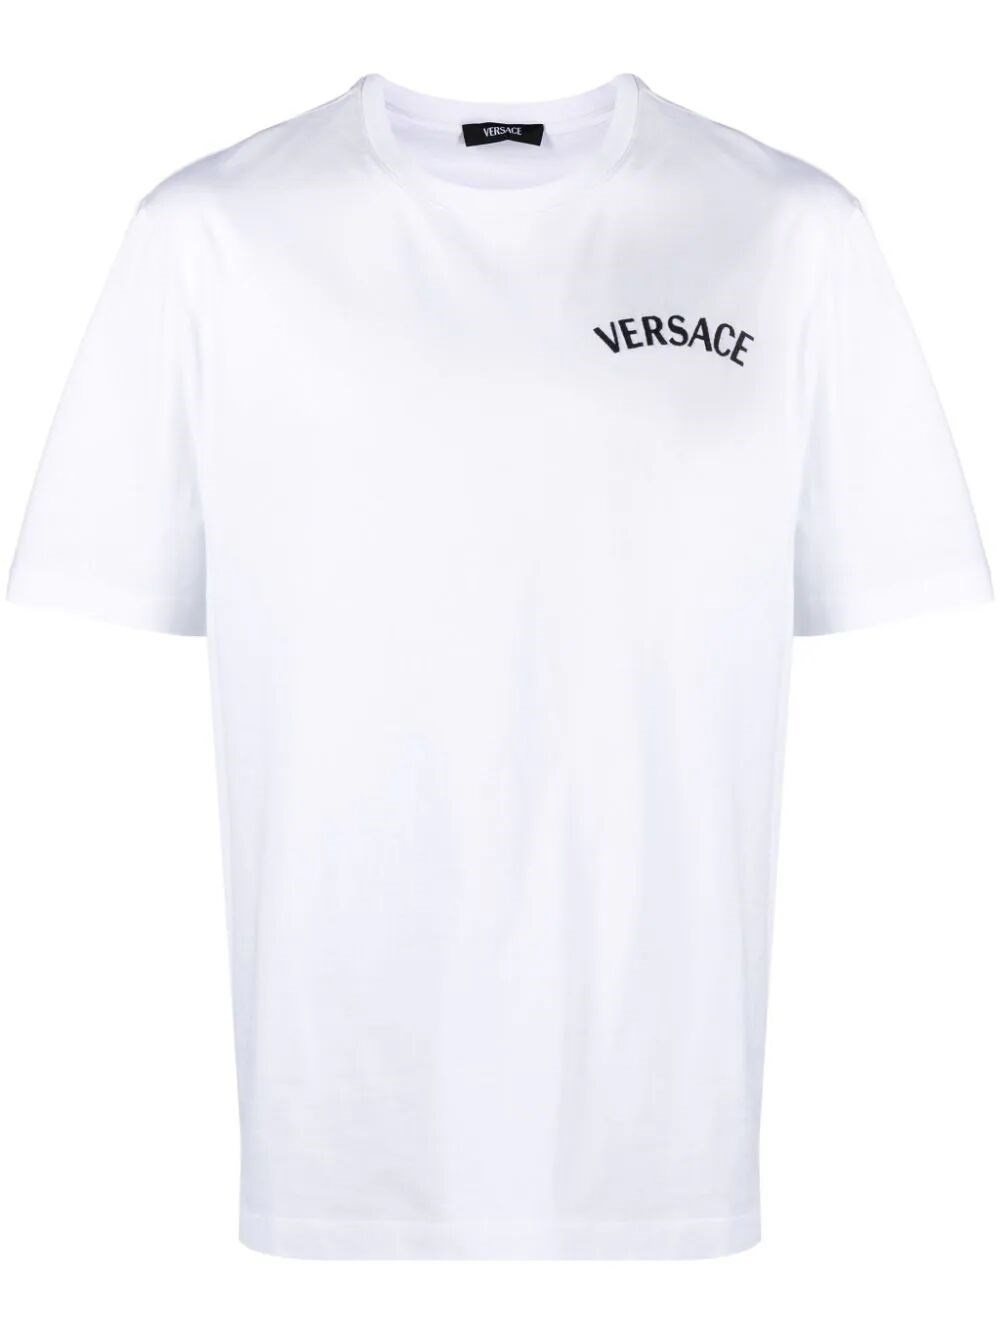 `Versace` Embroidery And `Versace Milano` Stamp Print T-Shirt - 1